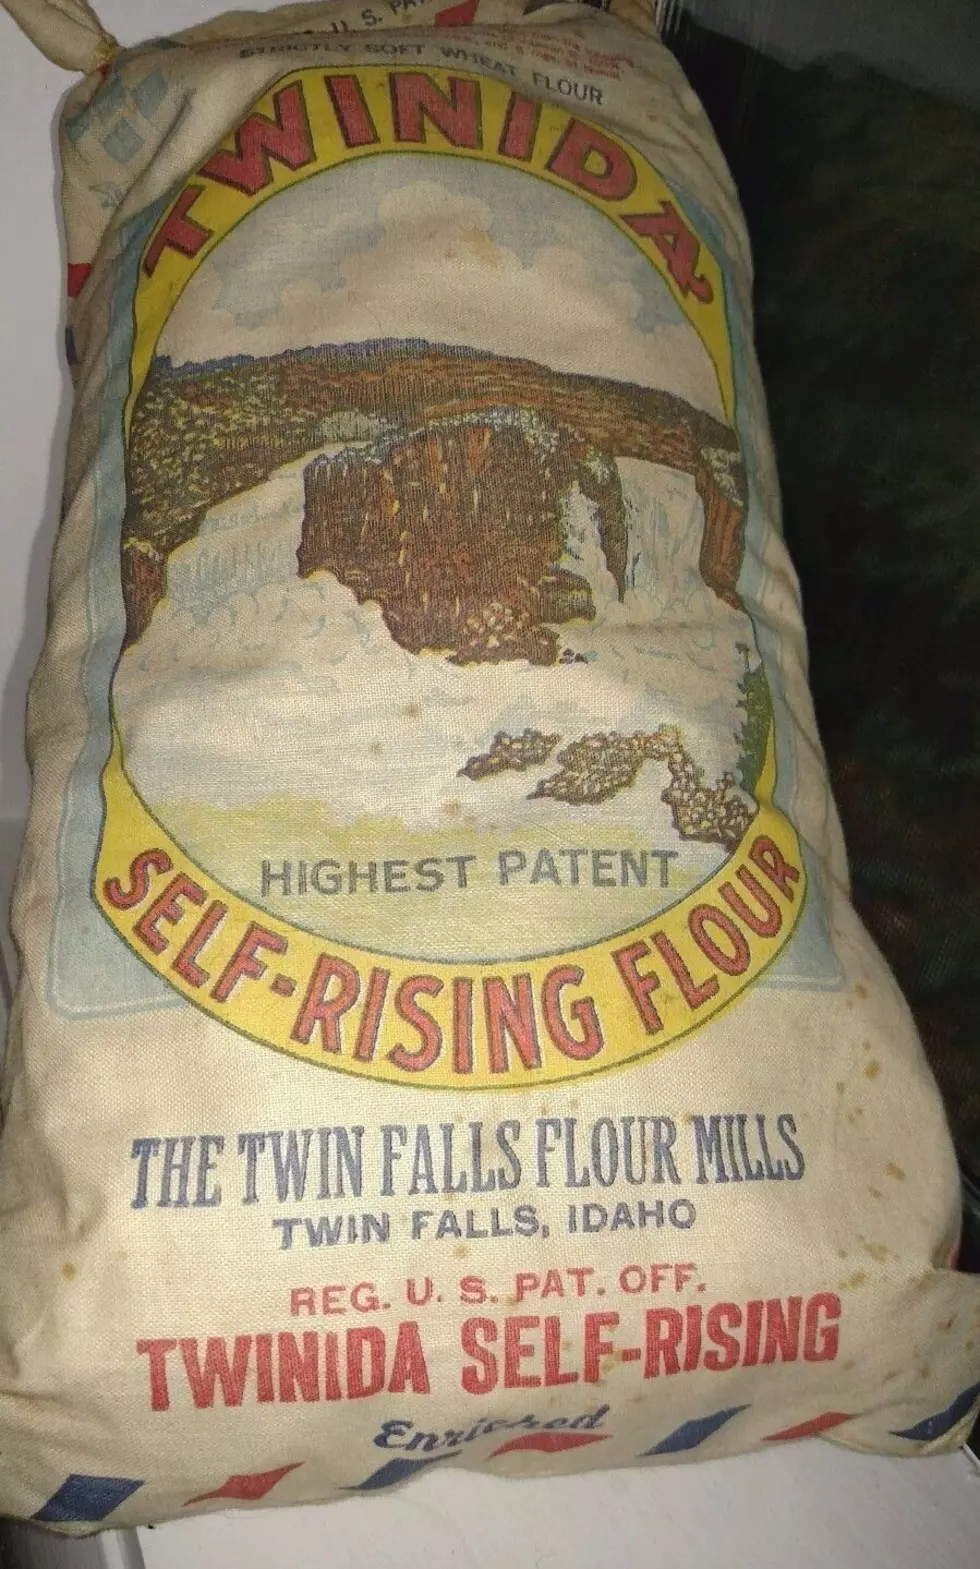 Check Out This Rare Twin Falls Flour Mills Bag I Found On Ebay